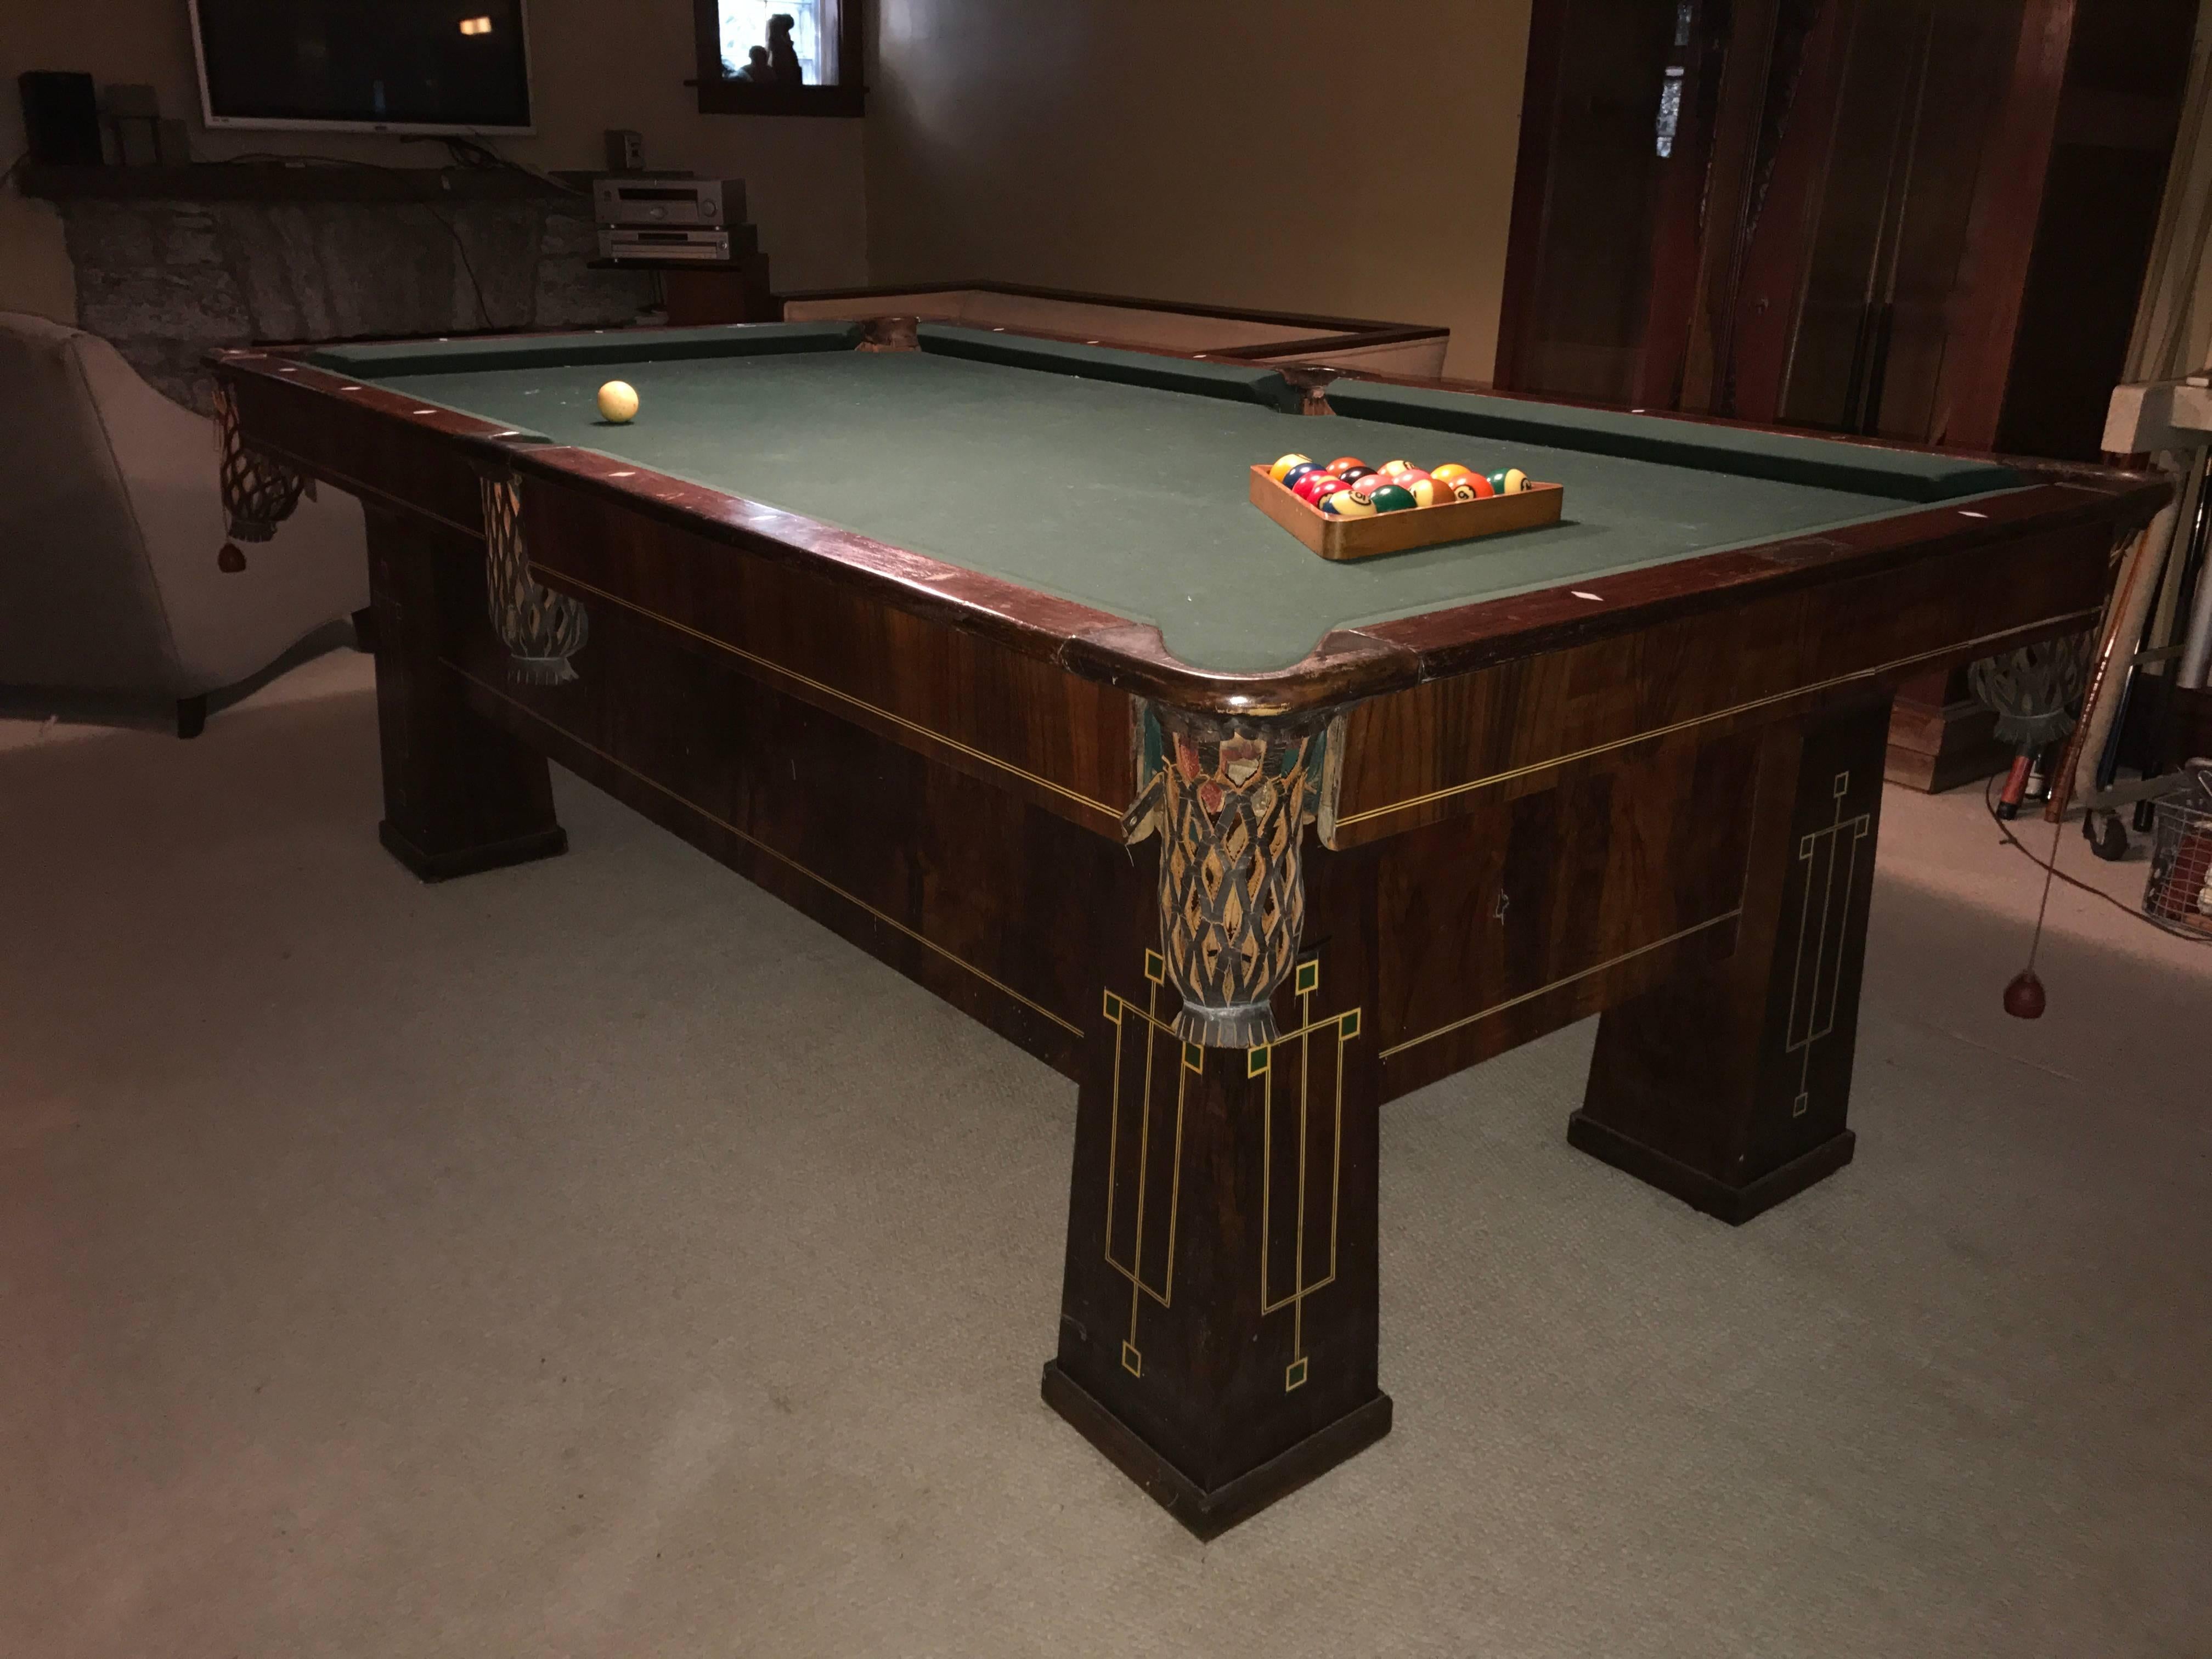 1918 Brunswick Balke Collender Arts & Crafts pool table.

Stunning crafts design,

The Brunswick Balke Collender Company introduced the Arcade model pool table in 1918 and kept it in production until 1924. Ours is a professional, or